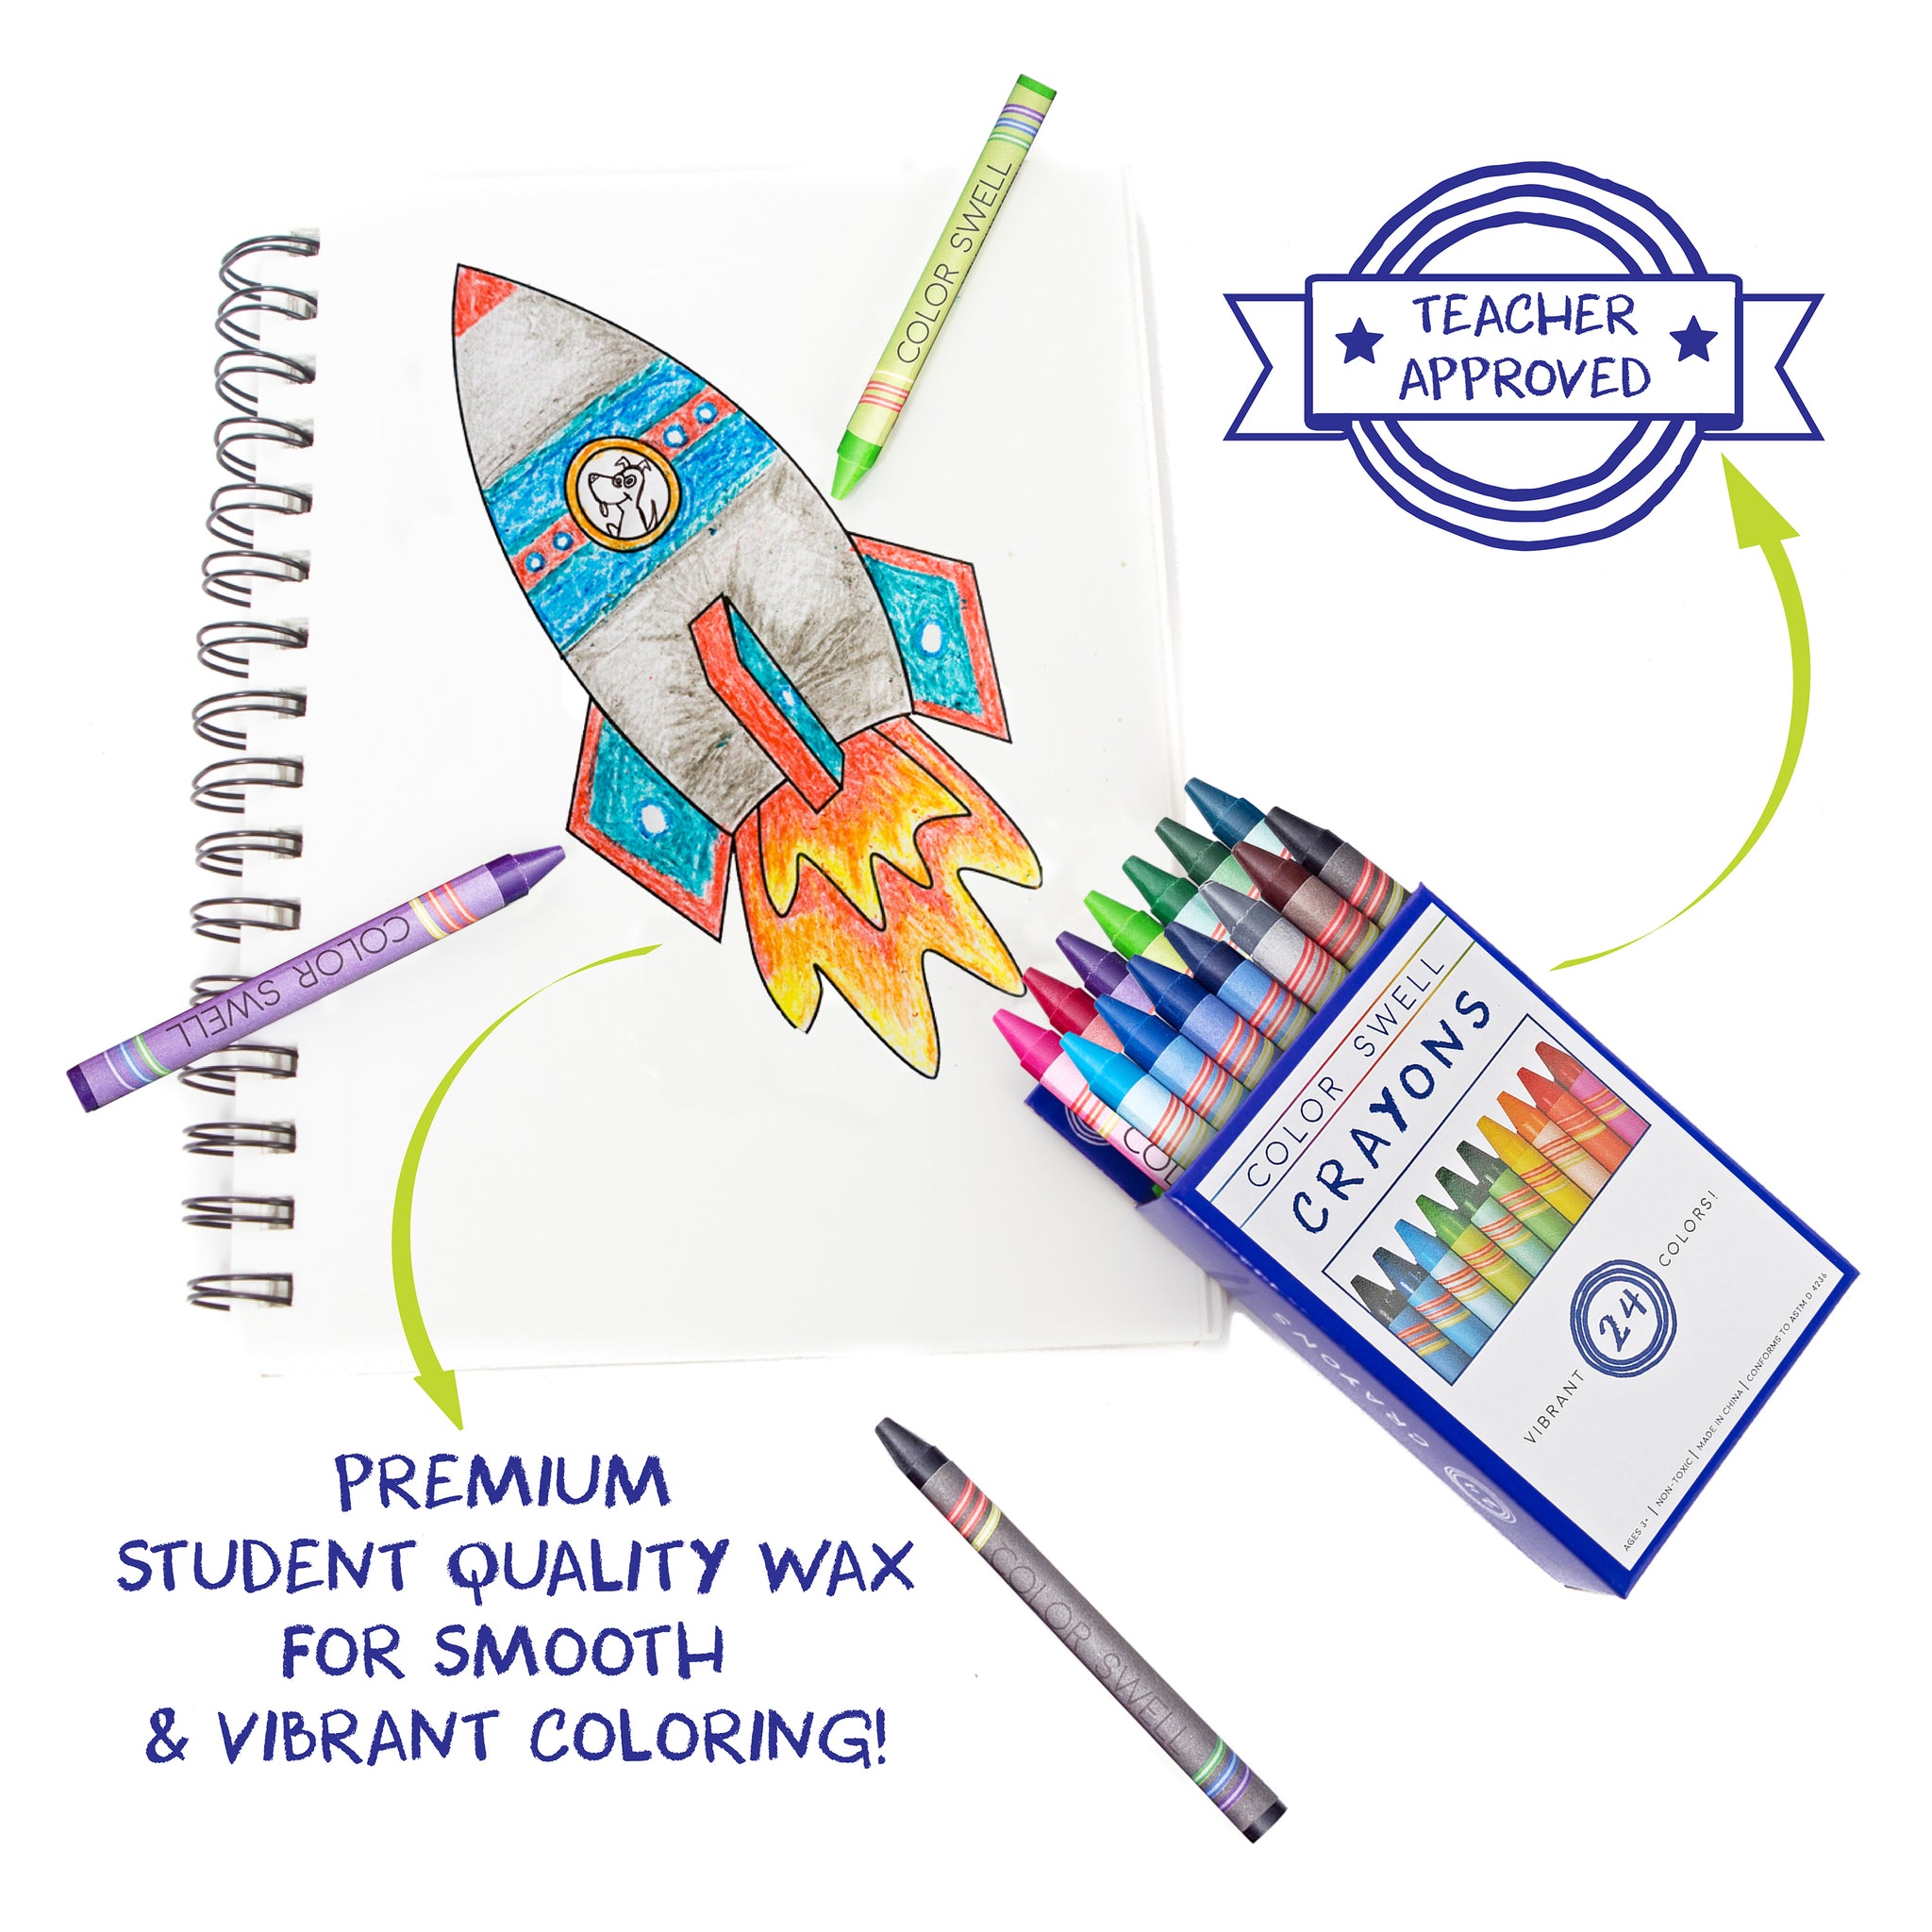  Color Swell Bulk Crayon Classpack - 1680 Crayons in 24